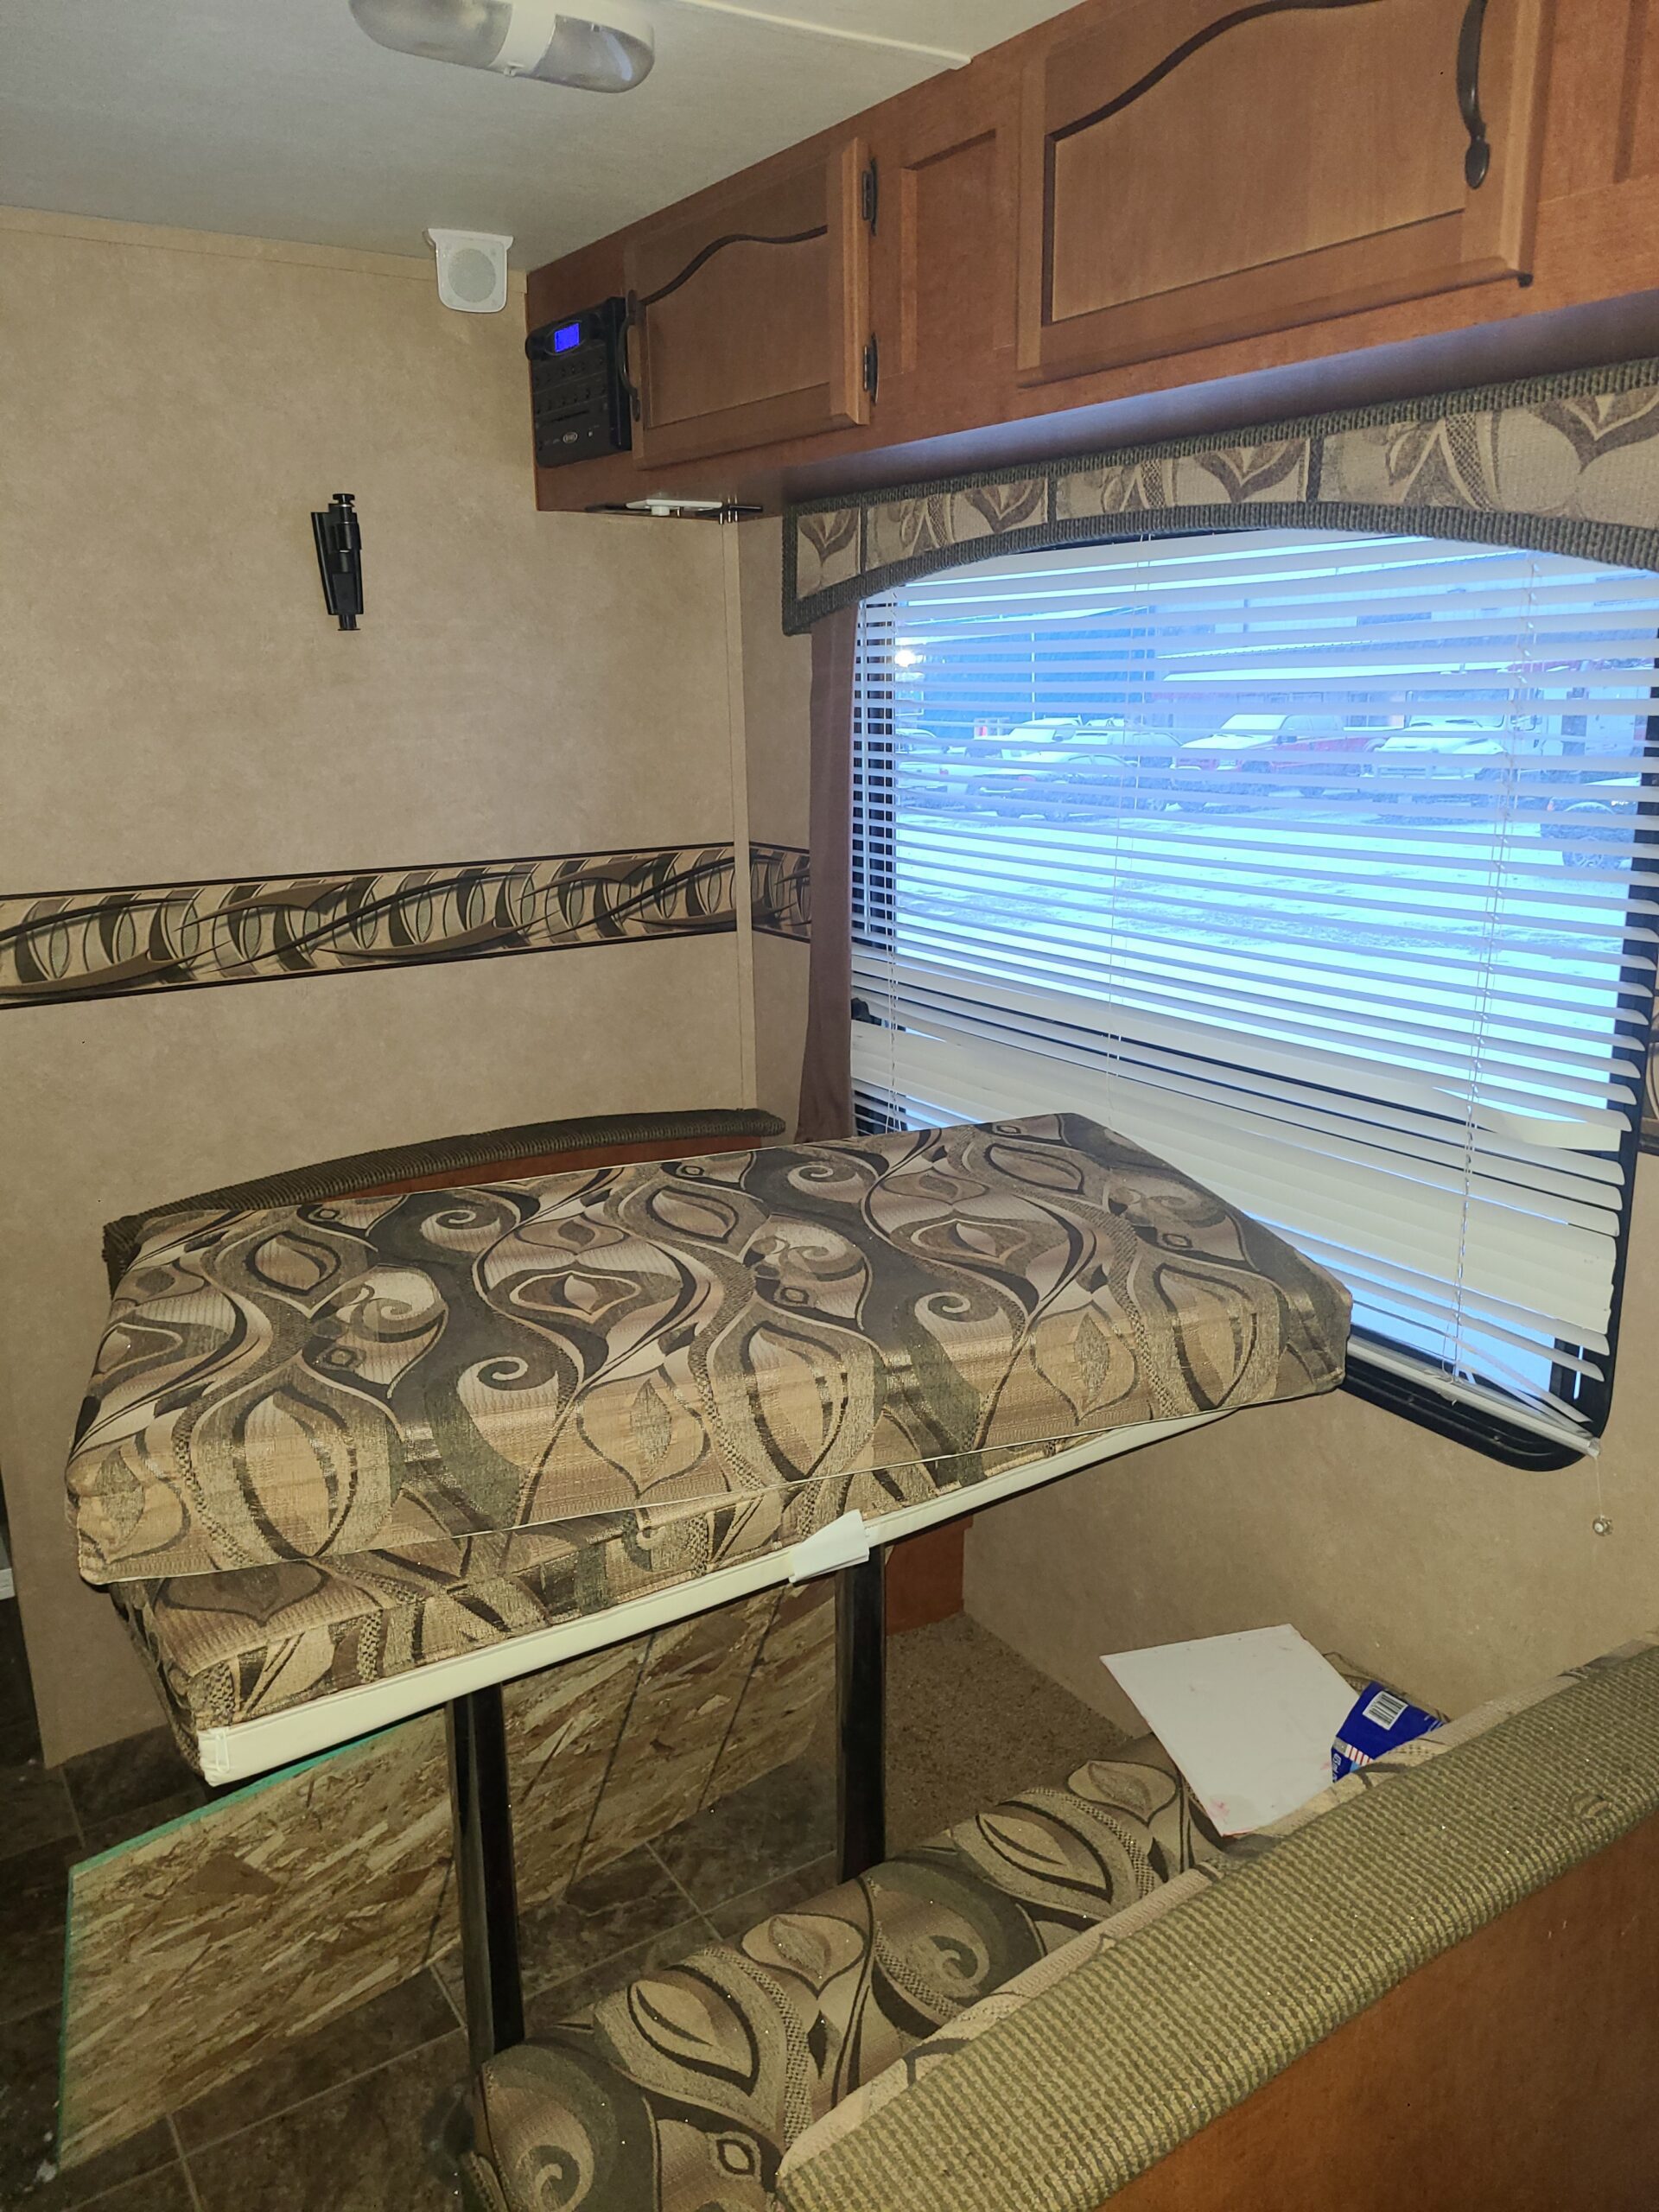 2013 Forest River Wildwood T25S    B-KAM-0317 Located in Kelowna